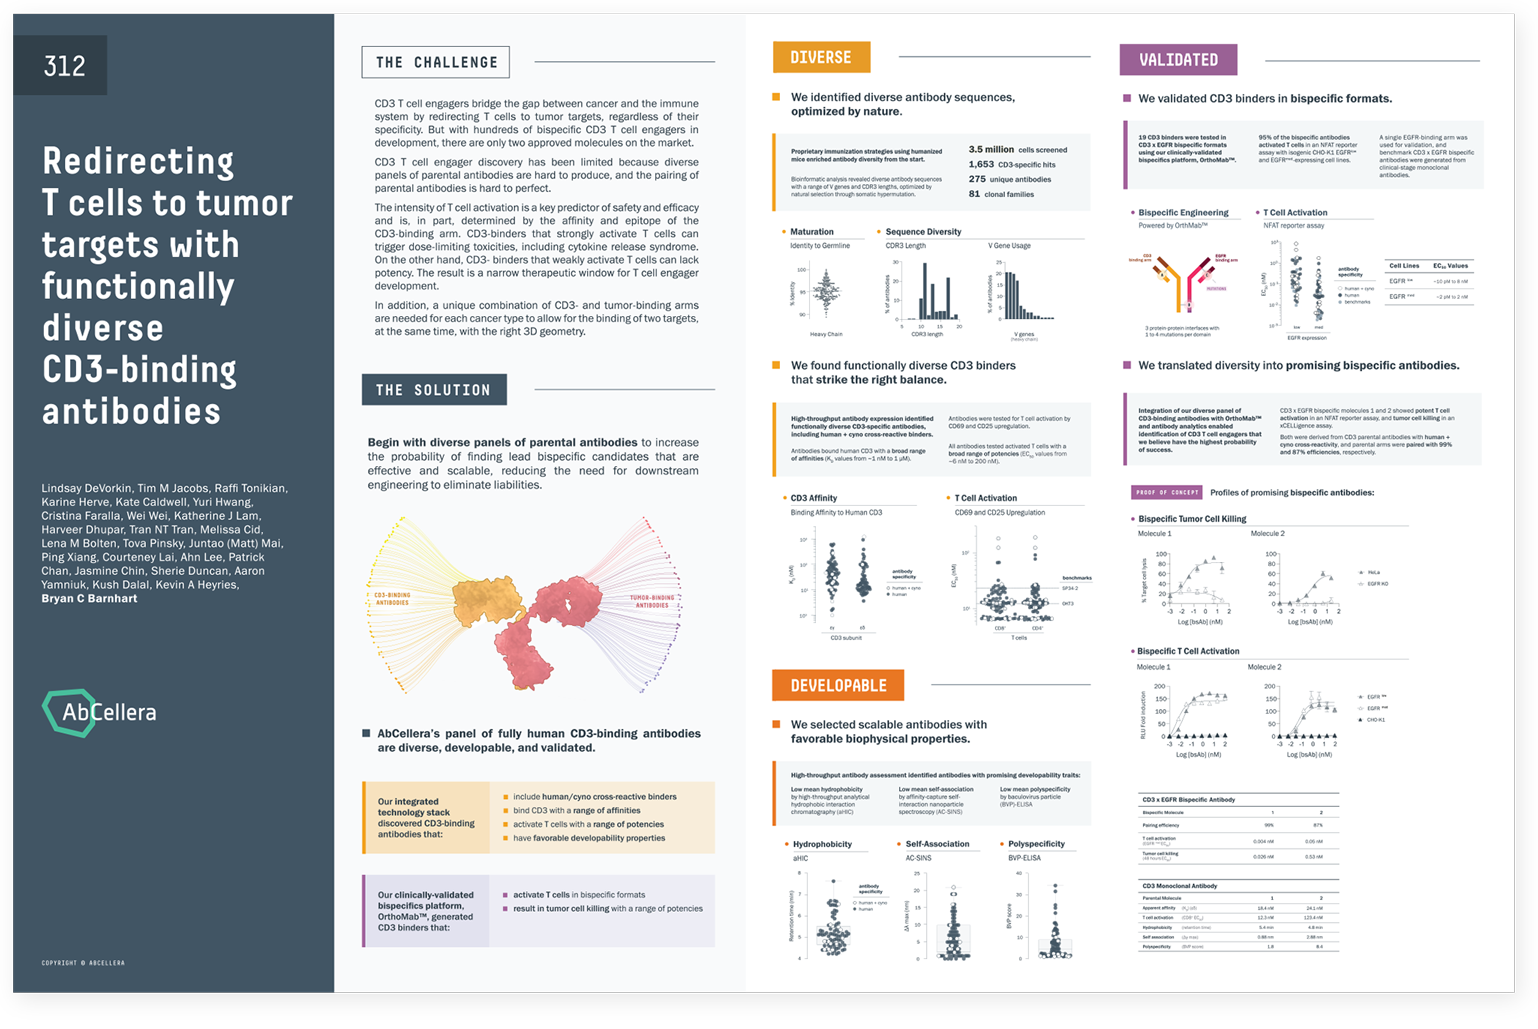 AbCellera AACR2022 Poster - T-cell Engagers